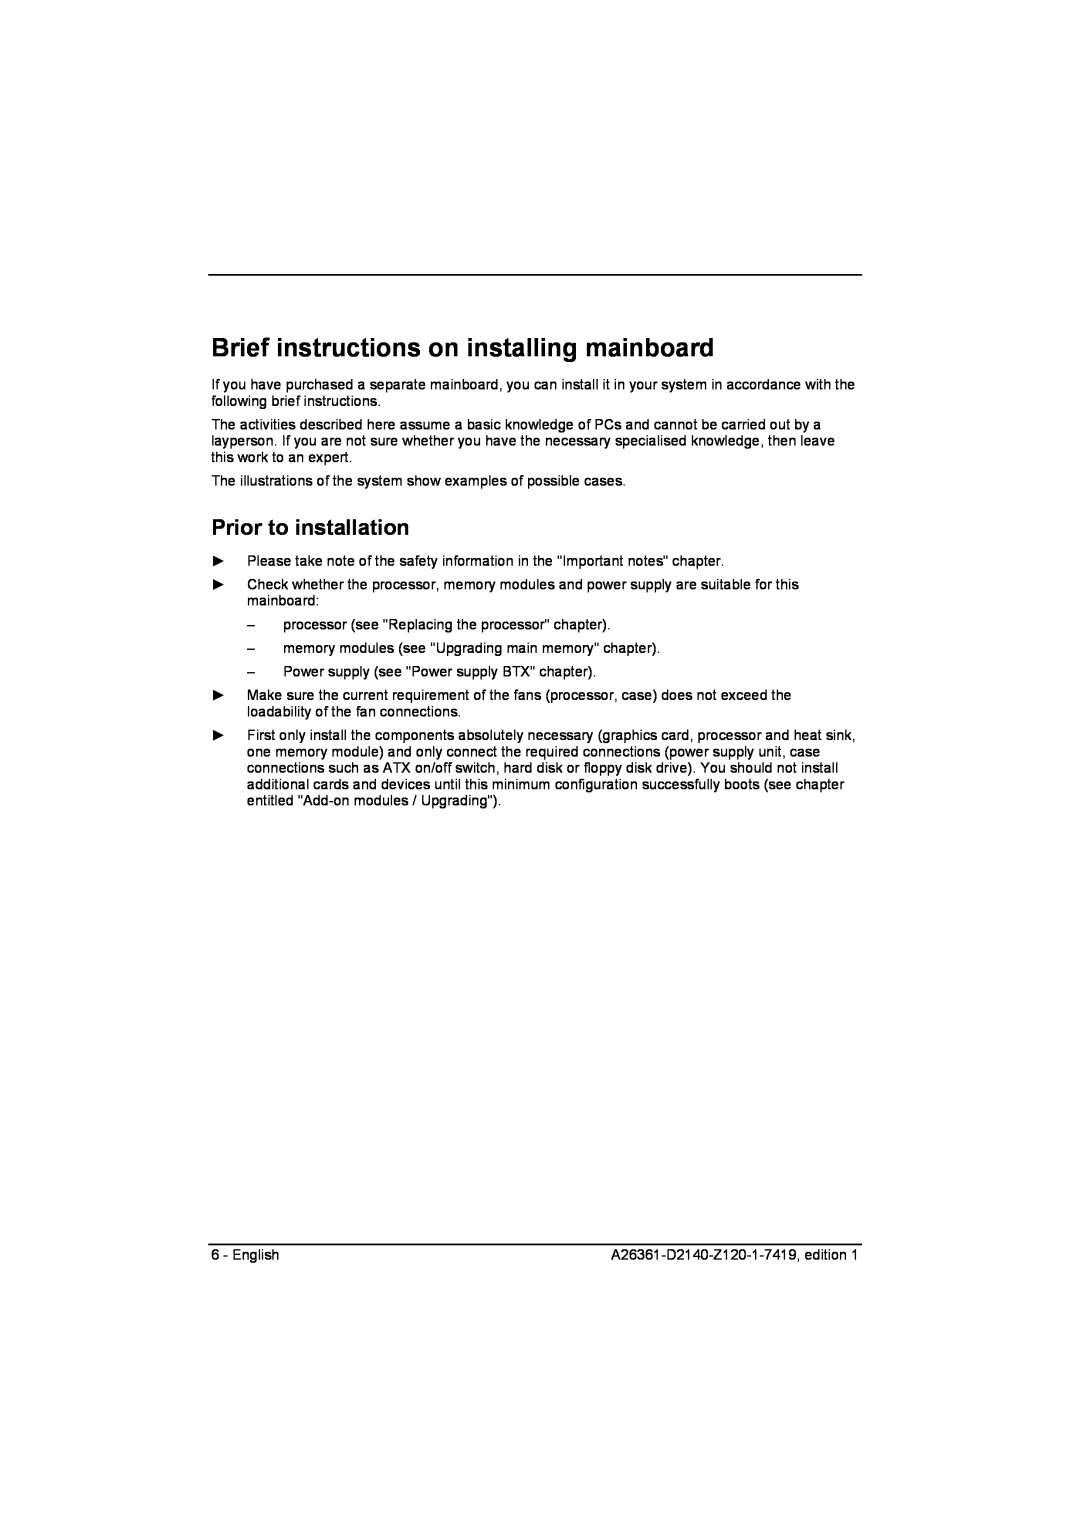 Eclipse - Fujitsu Ten D2140 technical manual Brief instructions on installing mainboard, Prior to installation 